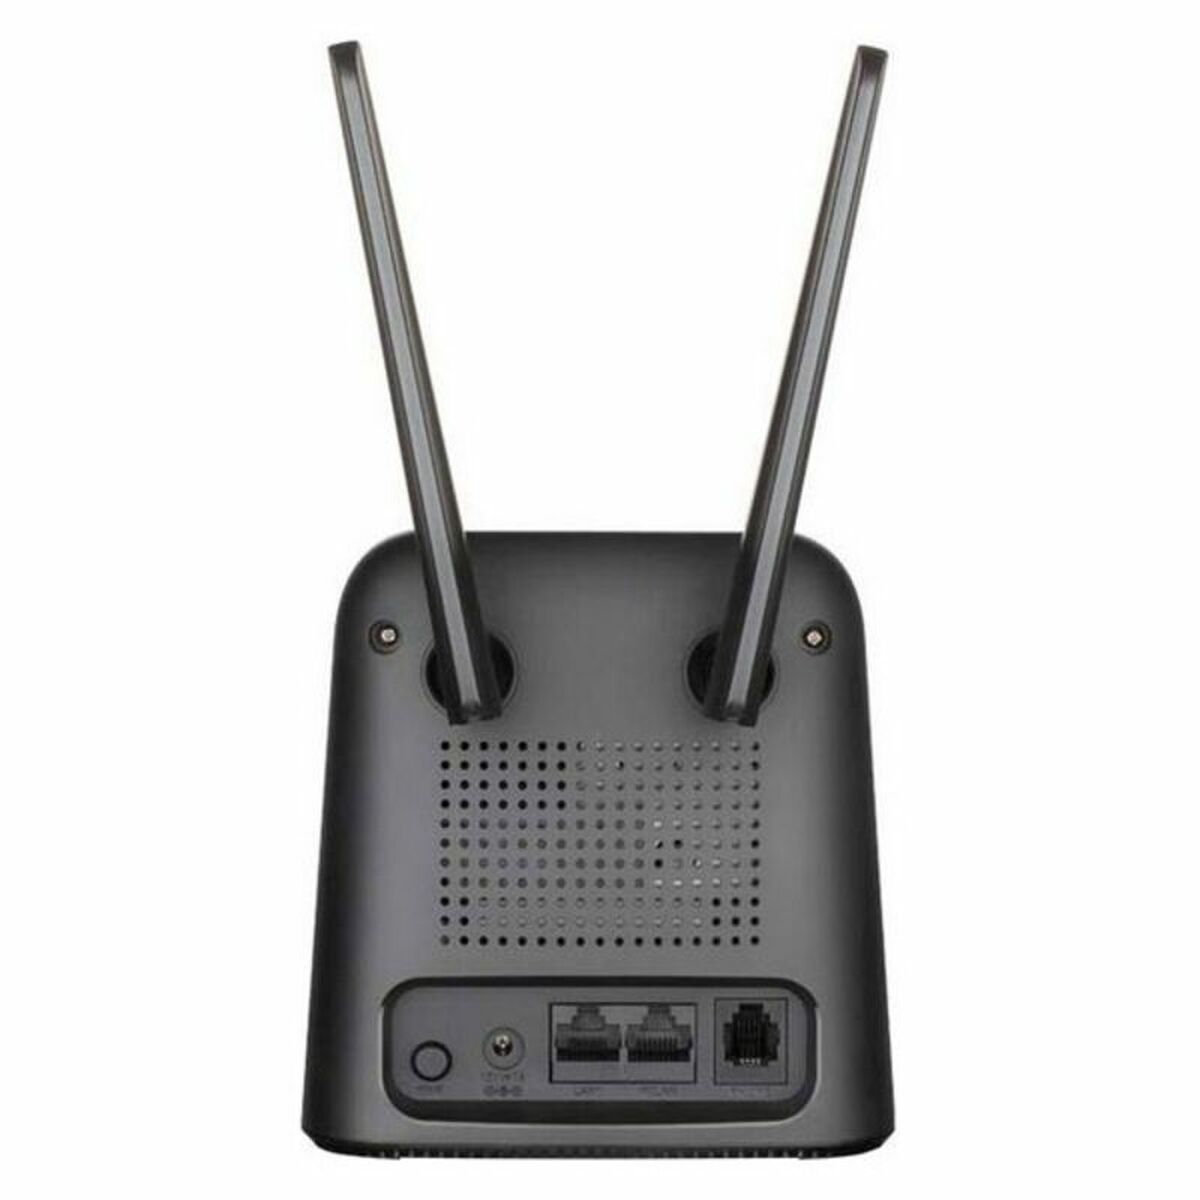 Router D-Link DWR-920/E, D-Link, Computing, Network devices, router-d-link-dwr-920-e, Brand_D-Link, category-reference-2609, category-reference-2803, category-reference-2826, category-reference-t-19685, category-reference-t-19914, Condition_NEW, networks/wiring, Price_100 - 200, Teleworking, RiotNook